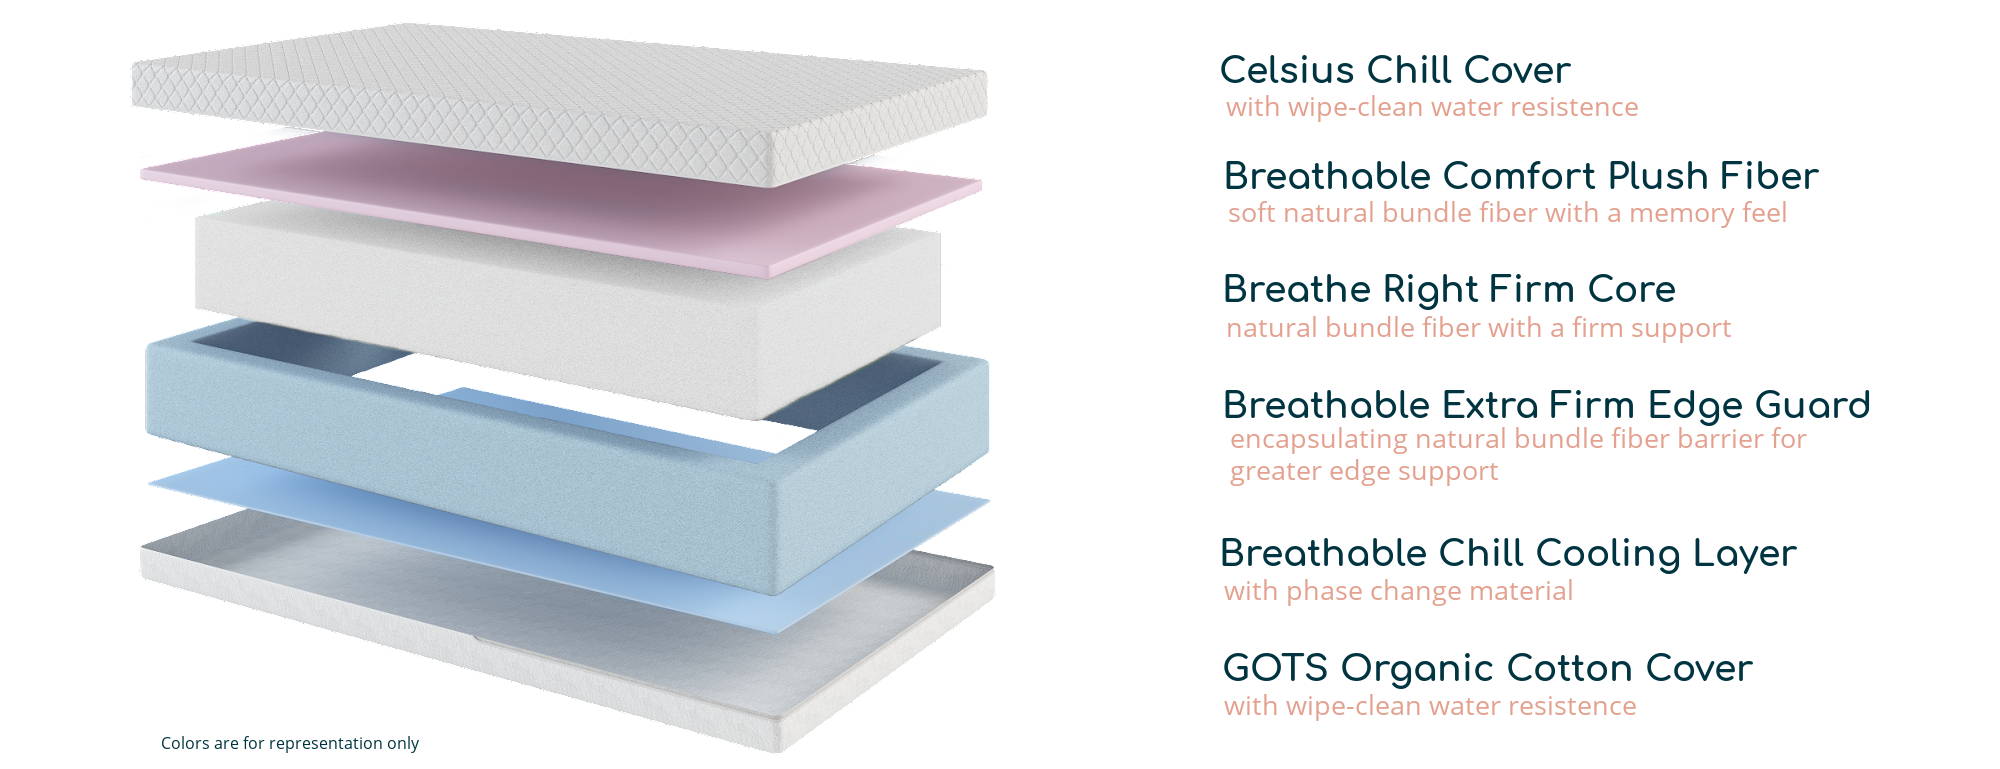 Celsius Chill Cover-with wipe clean resistance, Breathable Comfort Plush Fiber-soft natural bundle fiber with a memory feel, Breathe Right Firm Core-natural bundle fiber with a firm support, Breathable Extra Firm Edge Guard, Breathable Chill Cooling Layer, and GOTS Organic Cotton Cover.